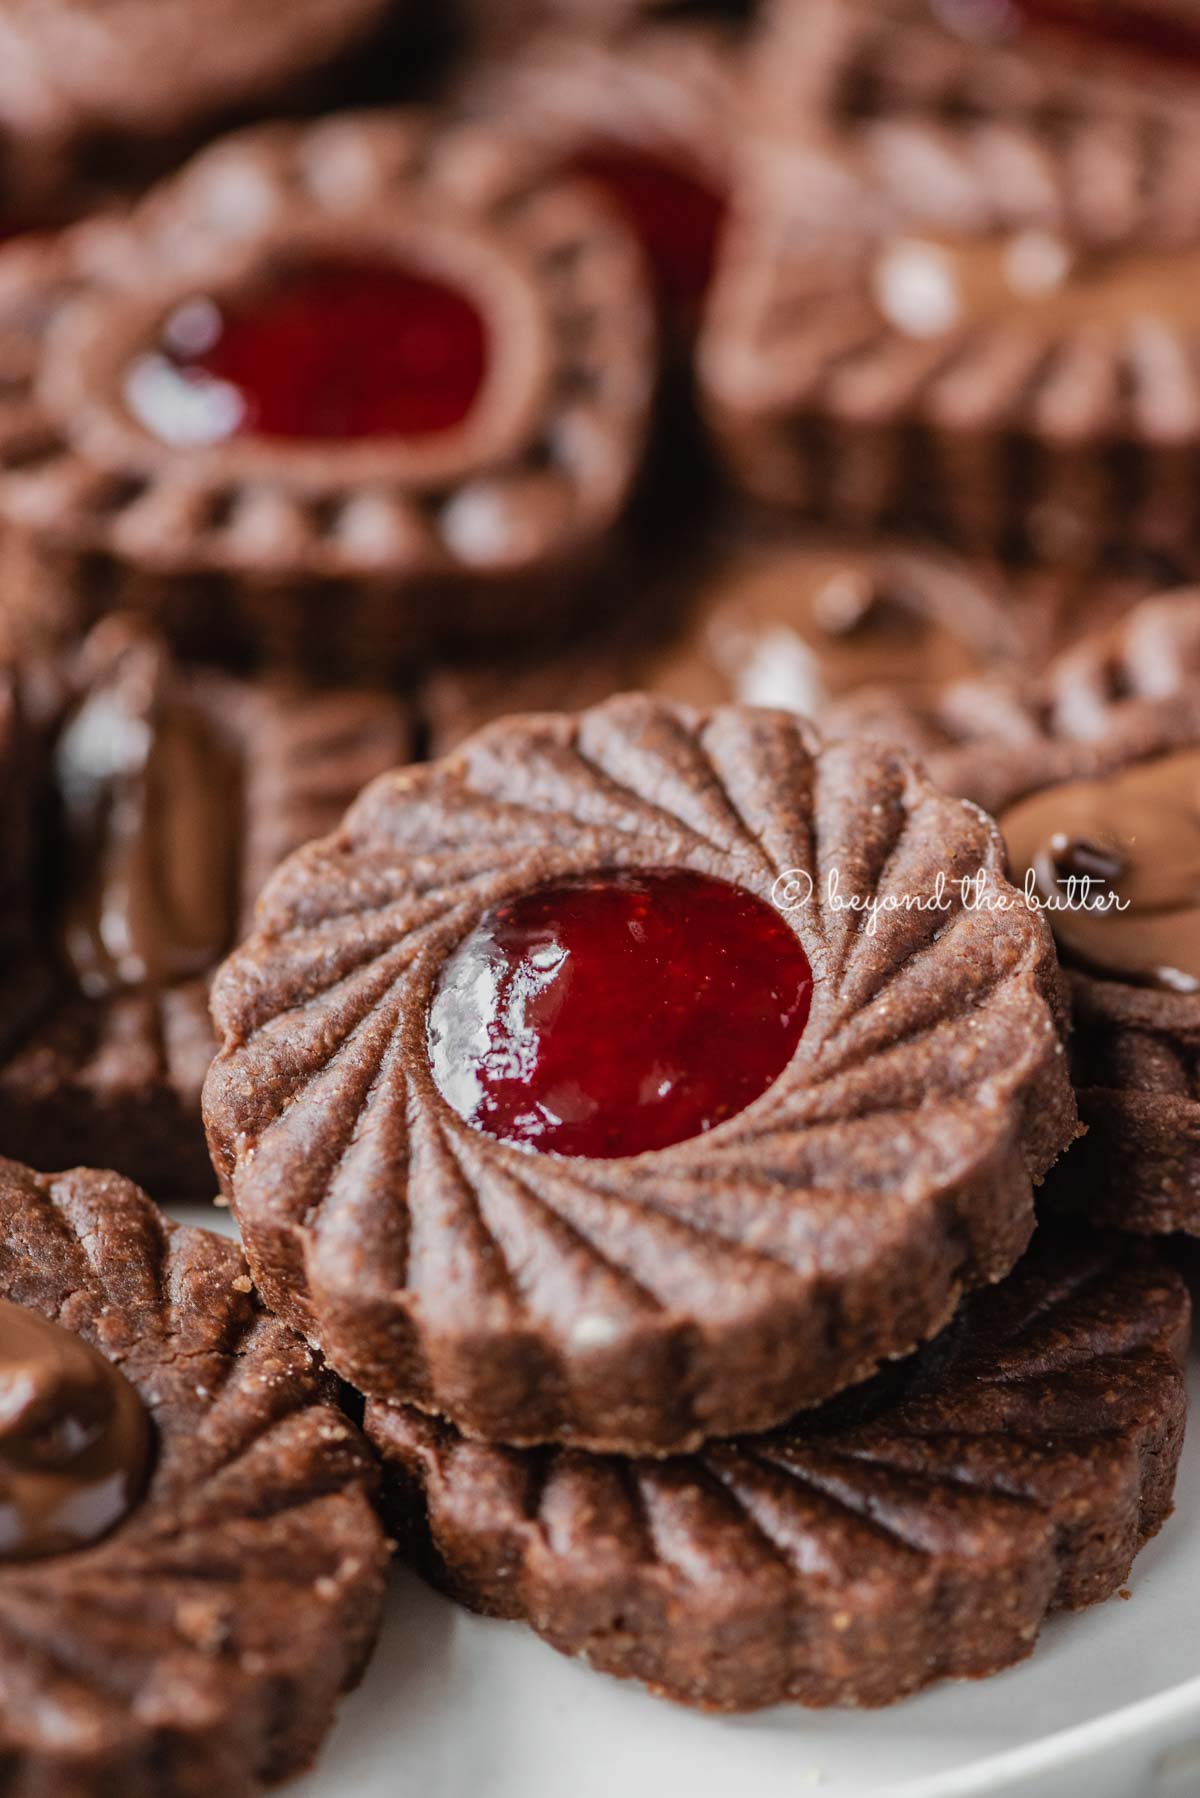 Closeup image of chocolate thumbprint cookies | All Images © Beyond the Butter®